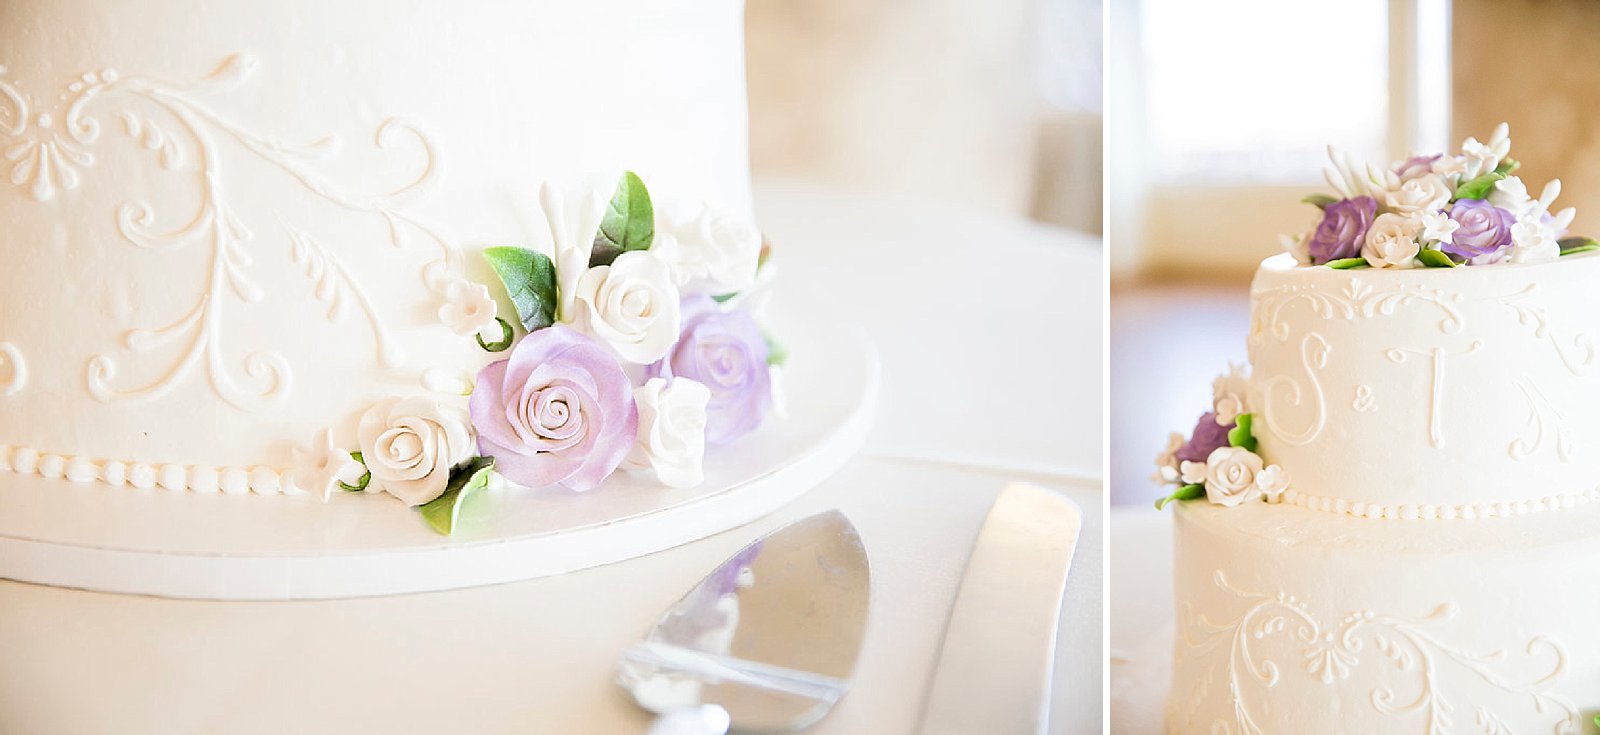 white and purple wedding cake at Falkner Winery photographed by Randi Michelle Photography